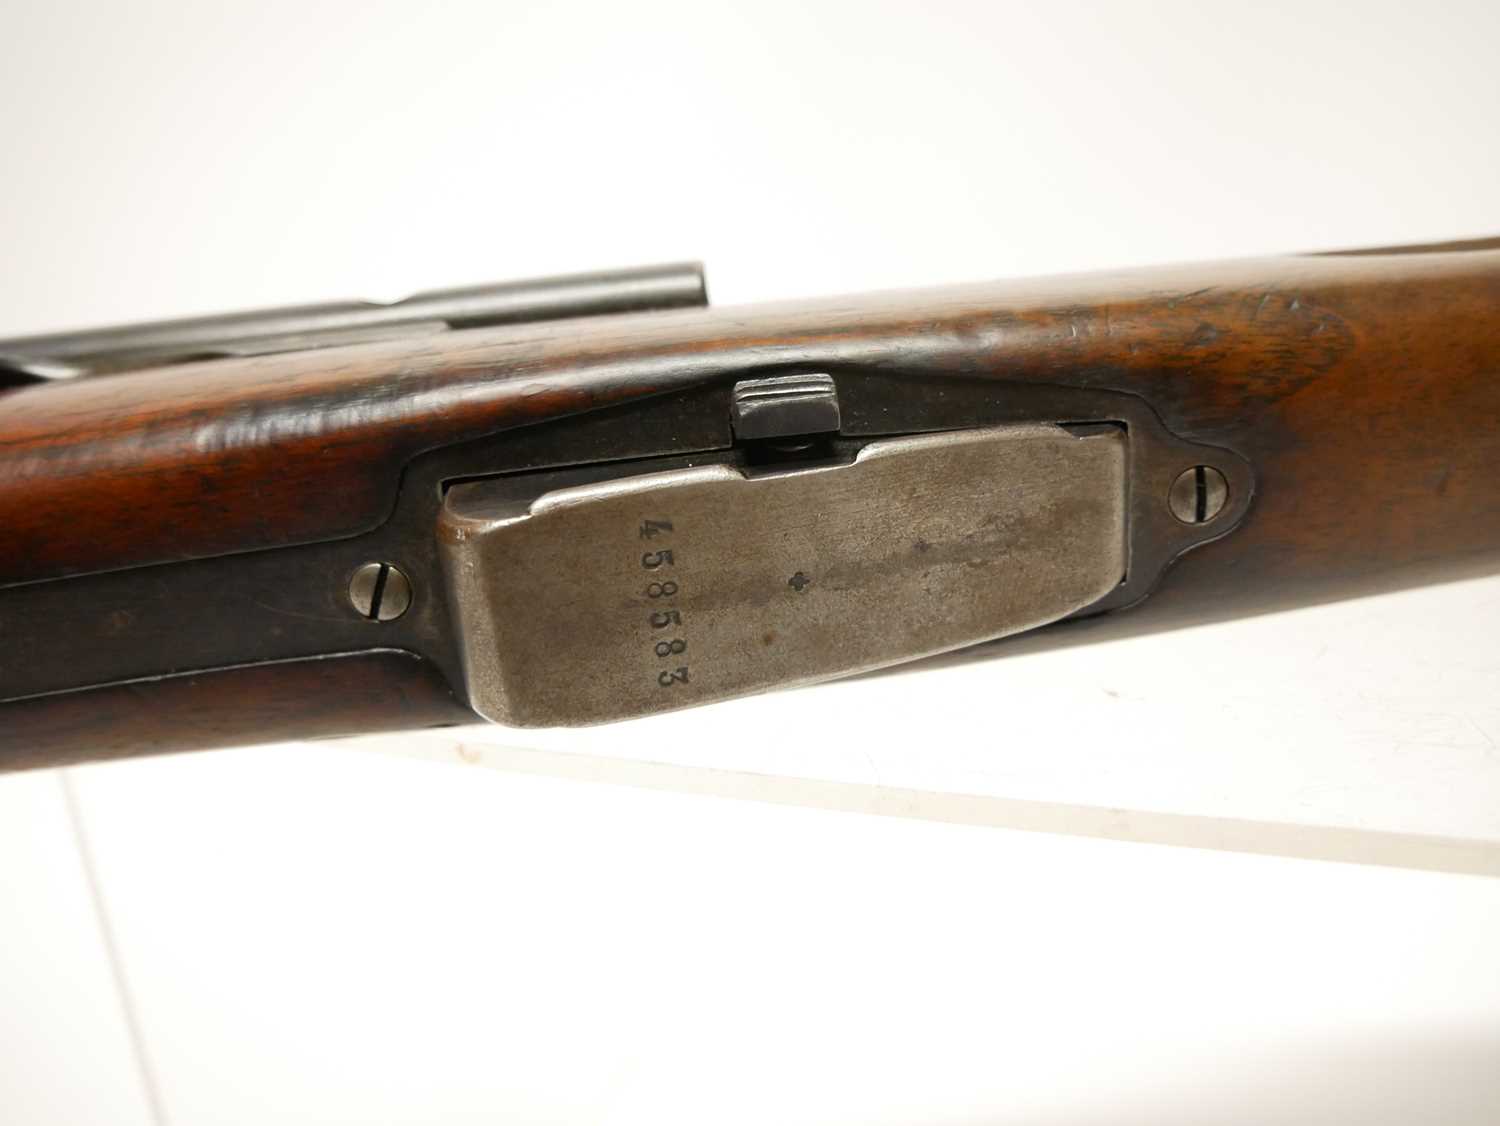 Schmidt Rubin 1911 7.5mm straight pull rifle, matching serial numbers 458583 to barrel, receiver, - Image 5 of 18